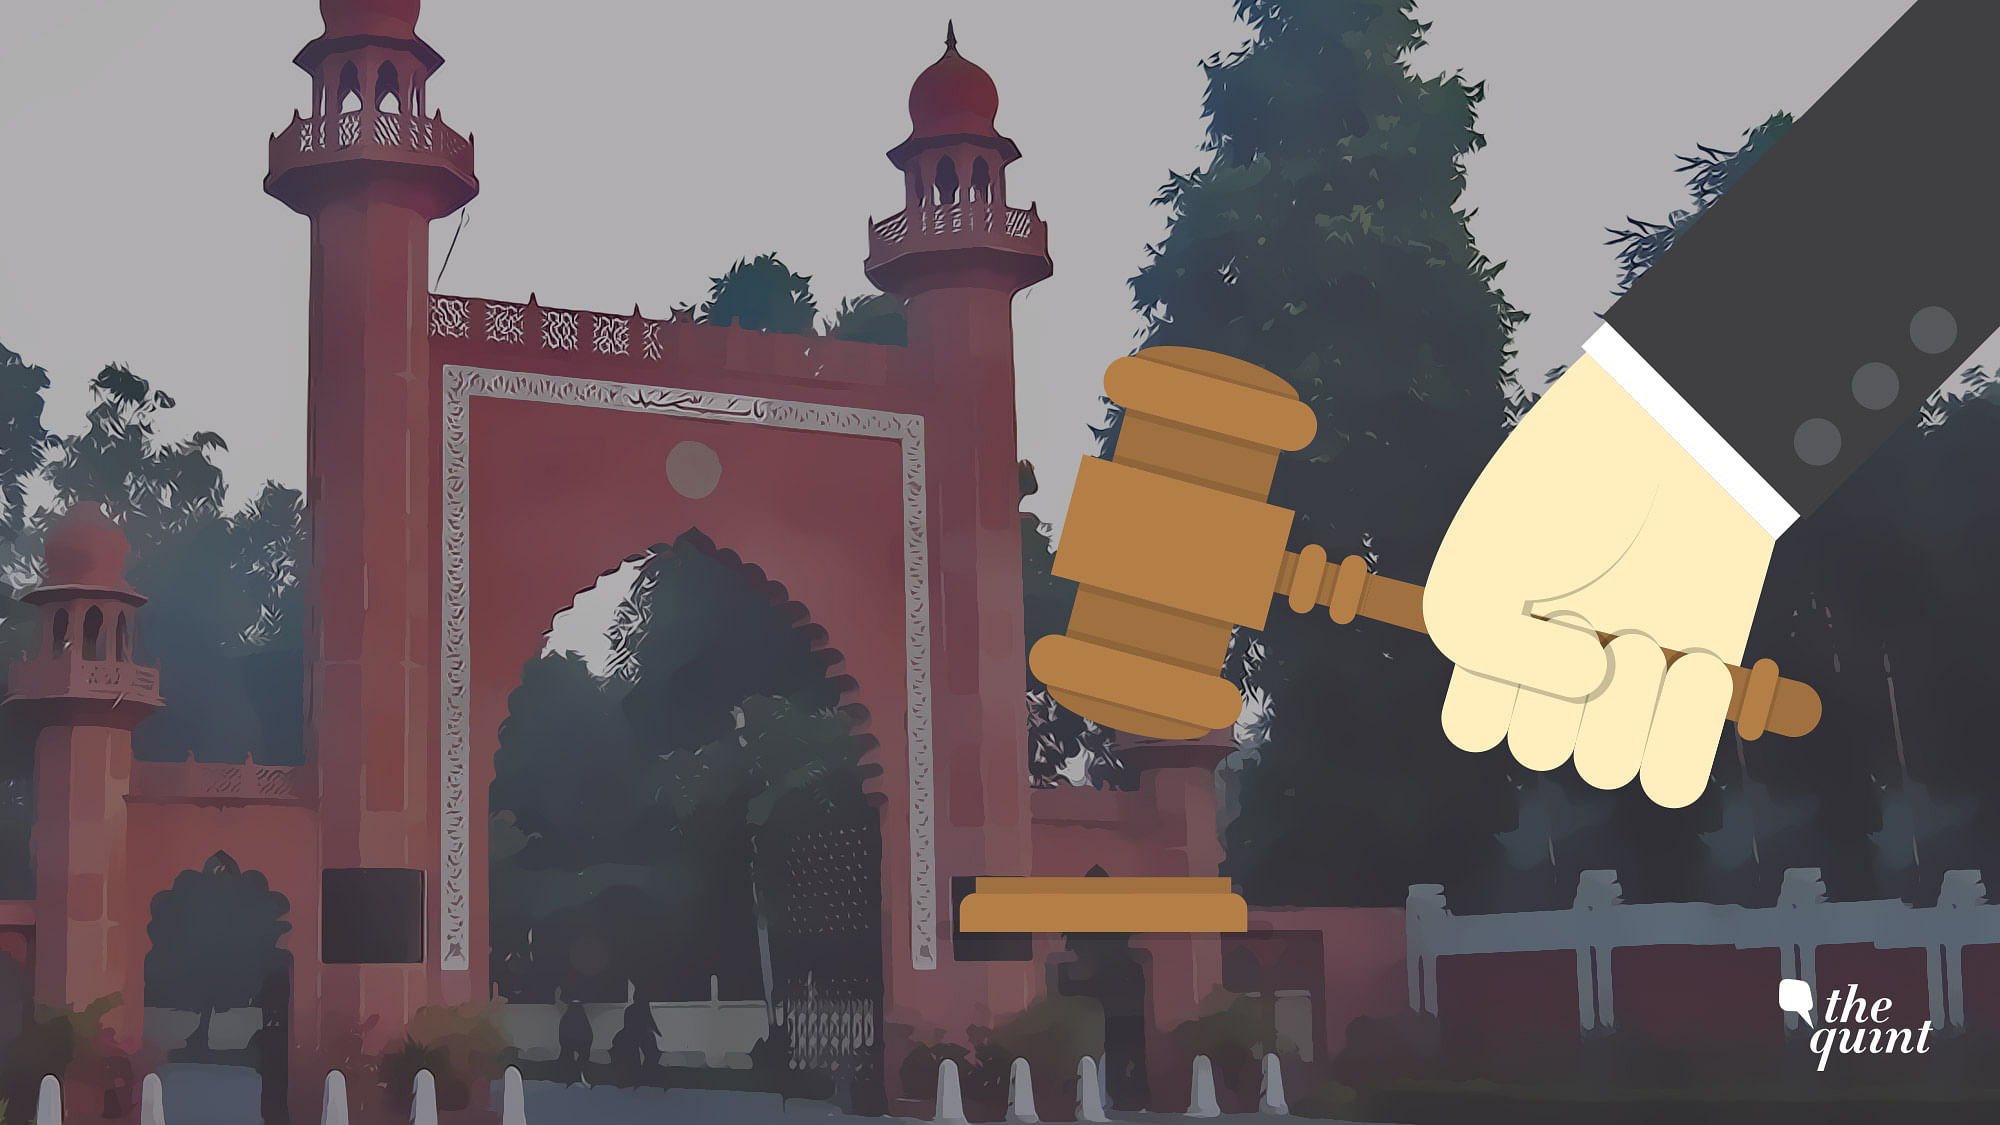 Aligarh Muslim University has claimed that since it is a minority institution it is exempted from reserving seats under the SC/ST category.